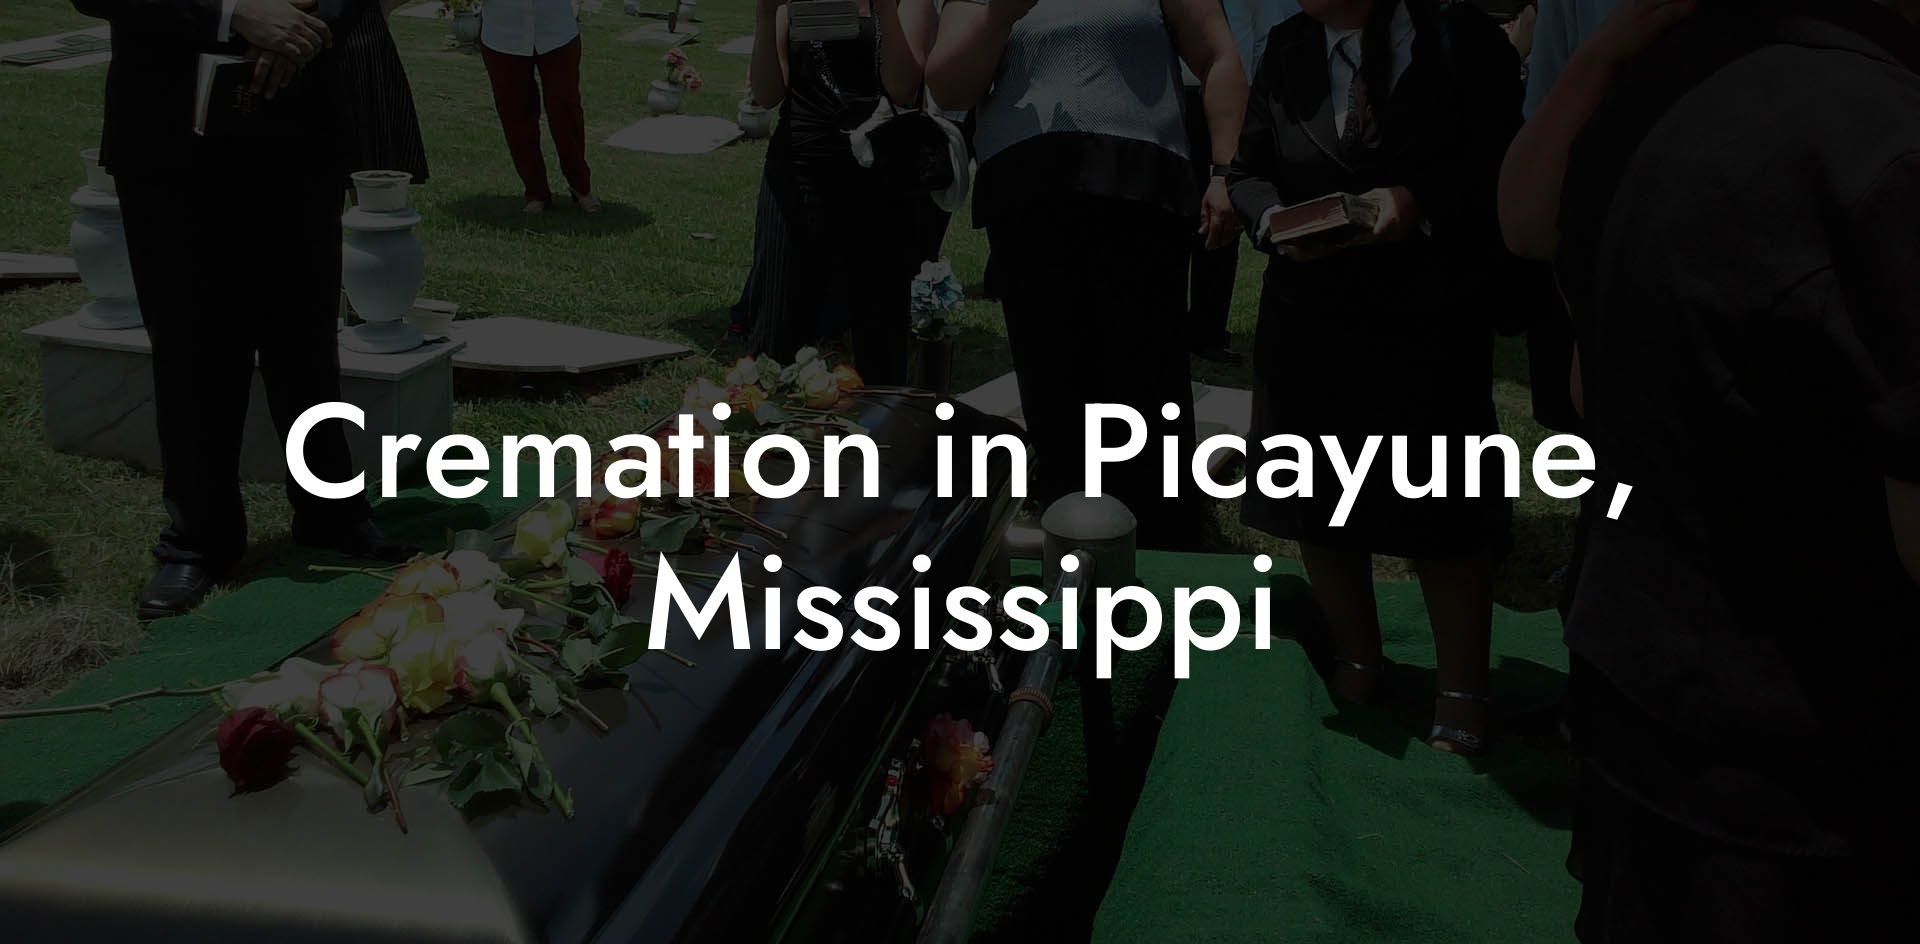 Cremation in Picayune, Mississippi